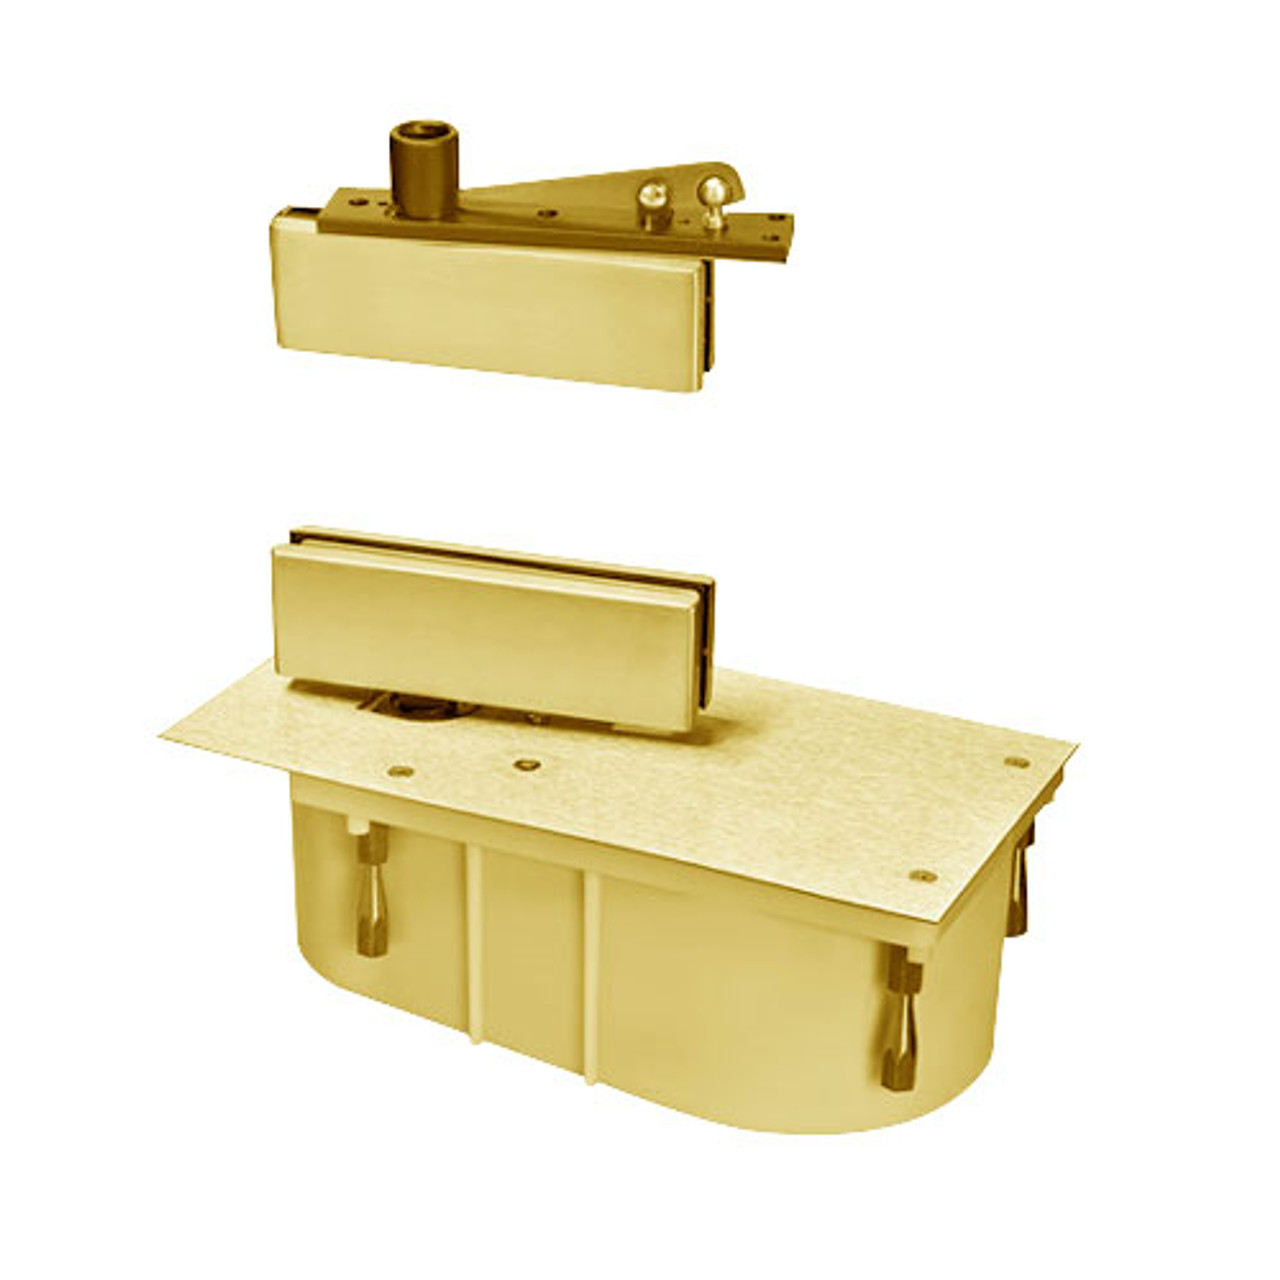 428-95N-LFP-CWF-LH-605 Rixson 428 Series Heavy Duty Single Acting Center Hung Floor Closer with Patch Fittings in Bright Brass Finish